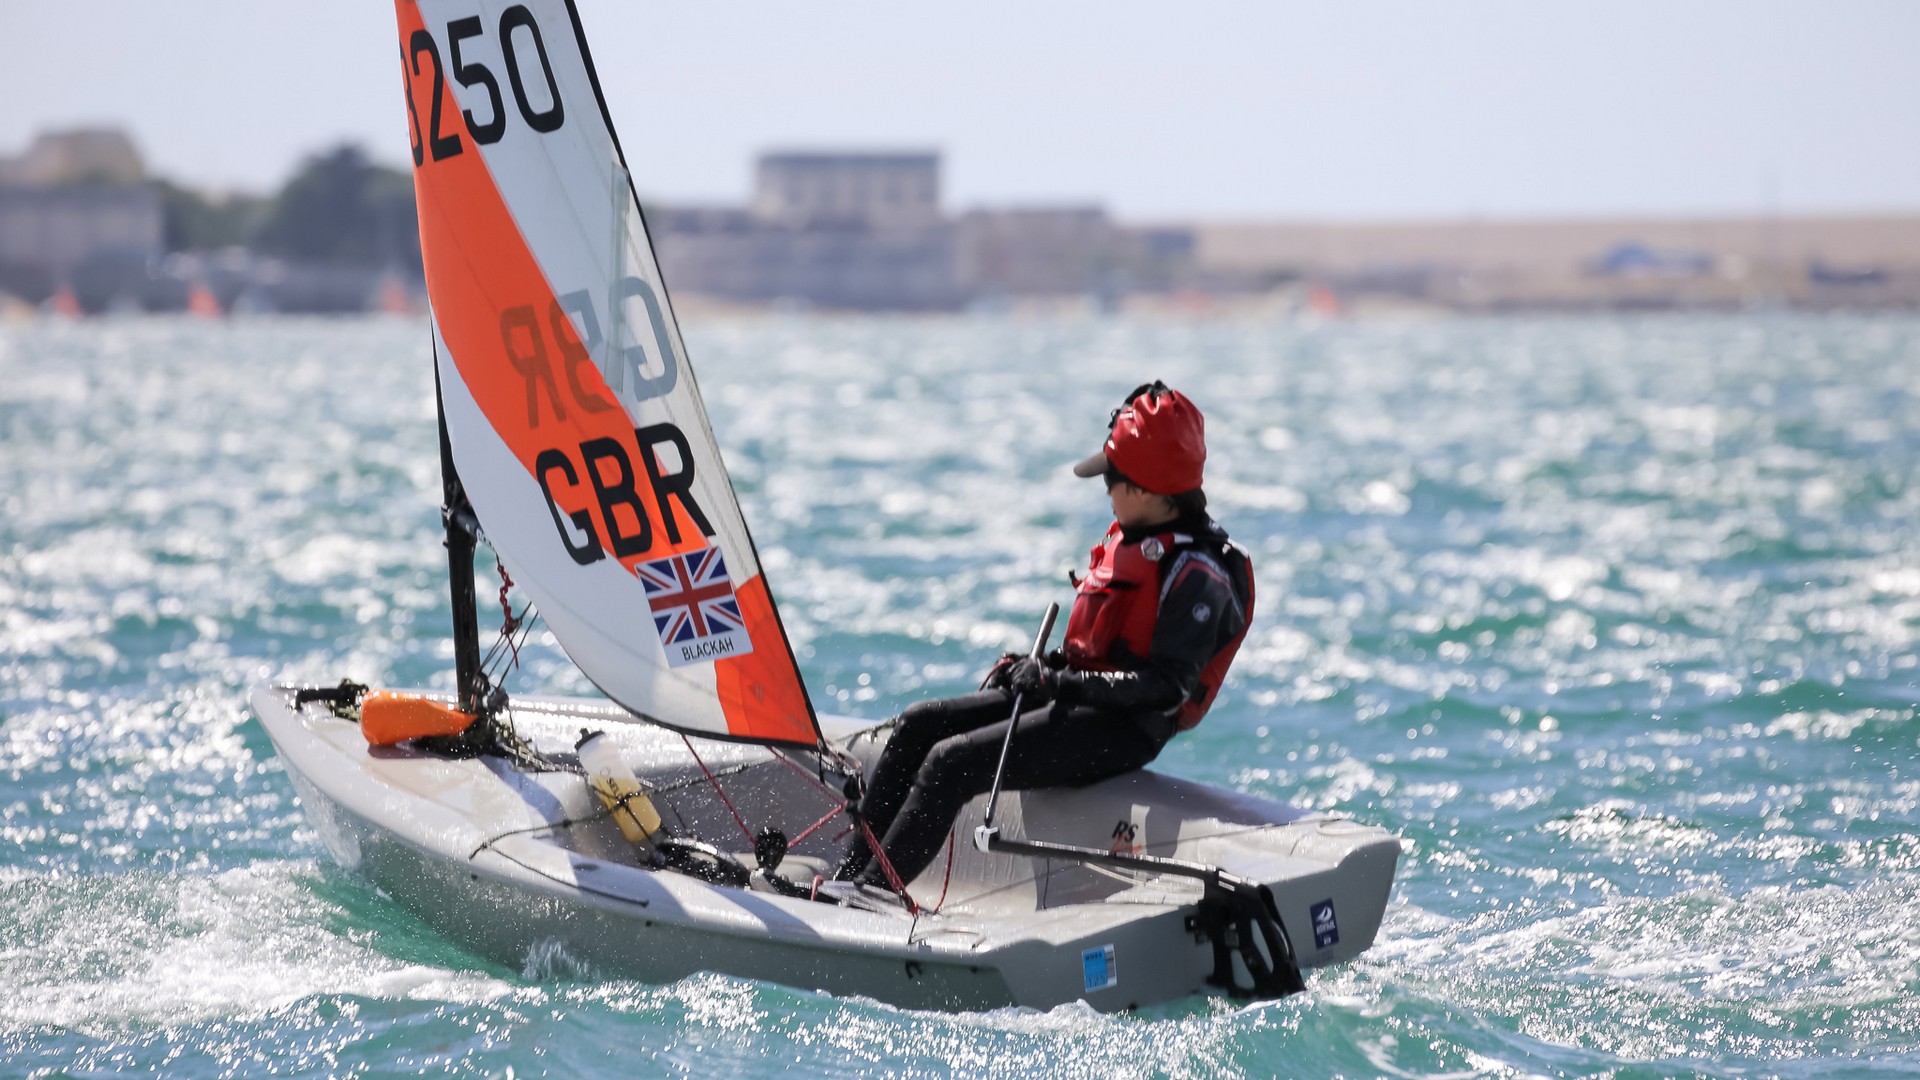 rs tera, sailing addictive – from young novice to